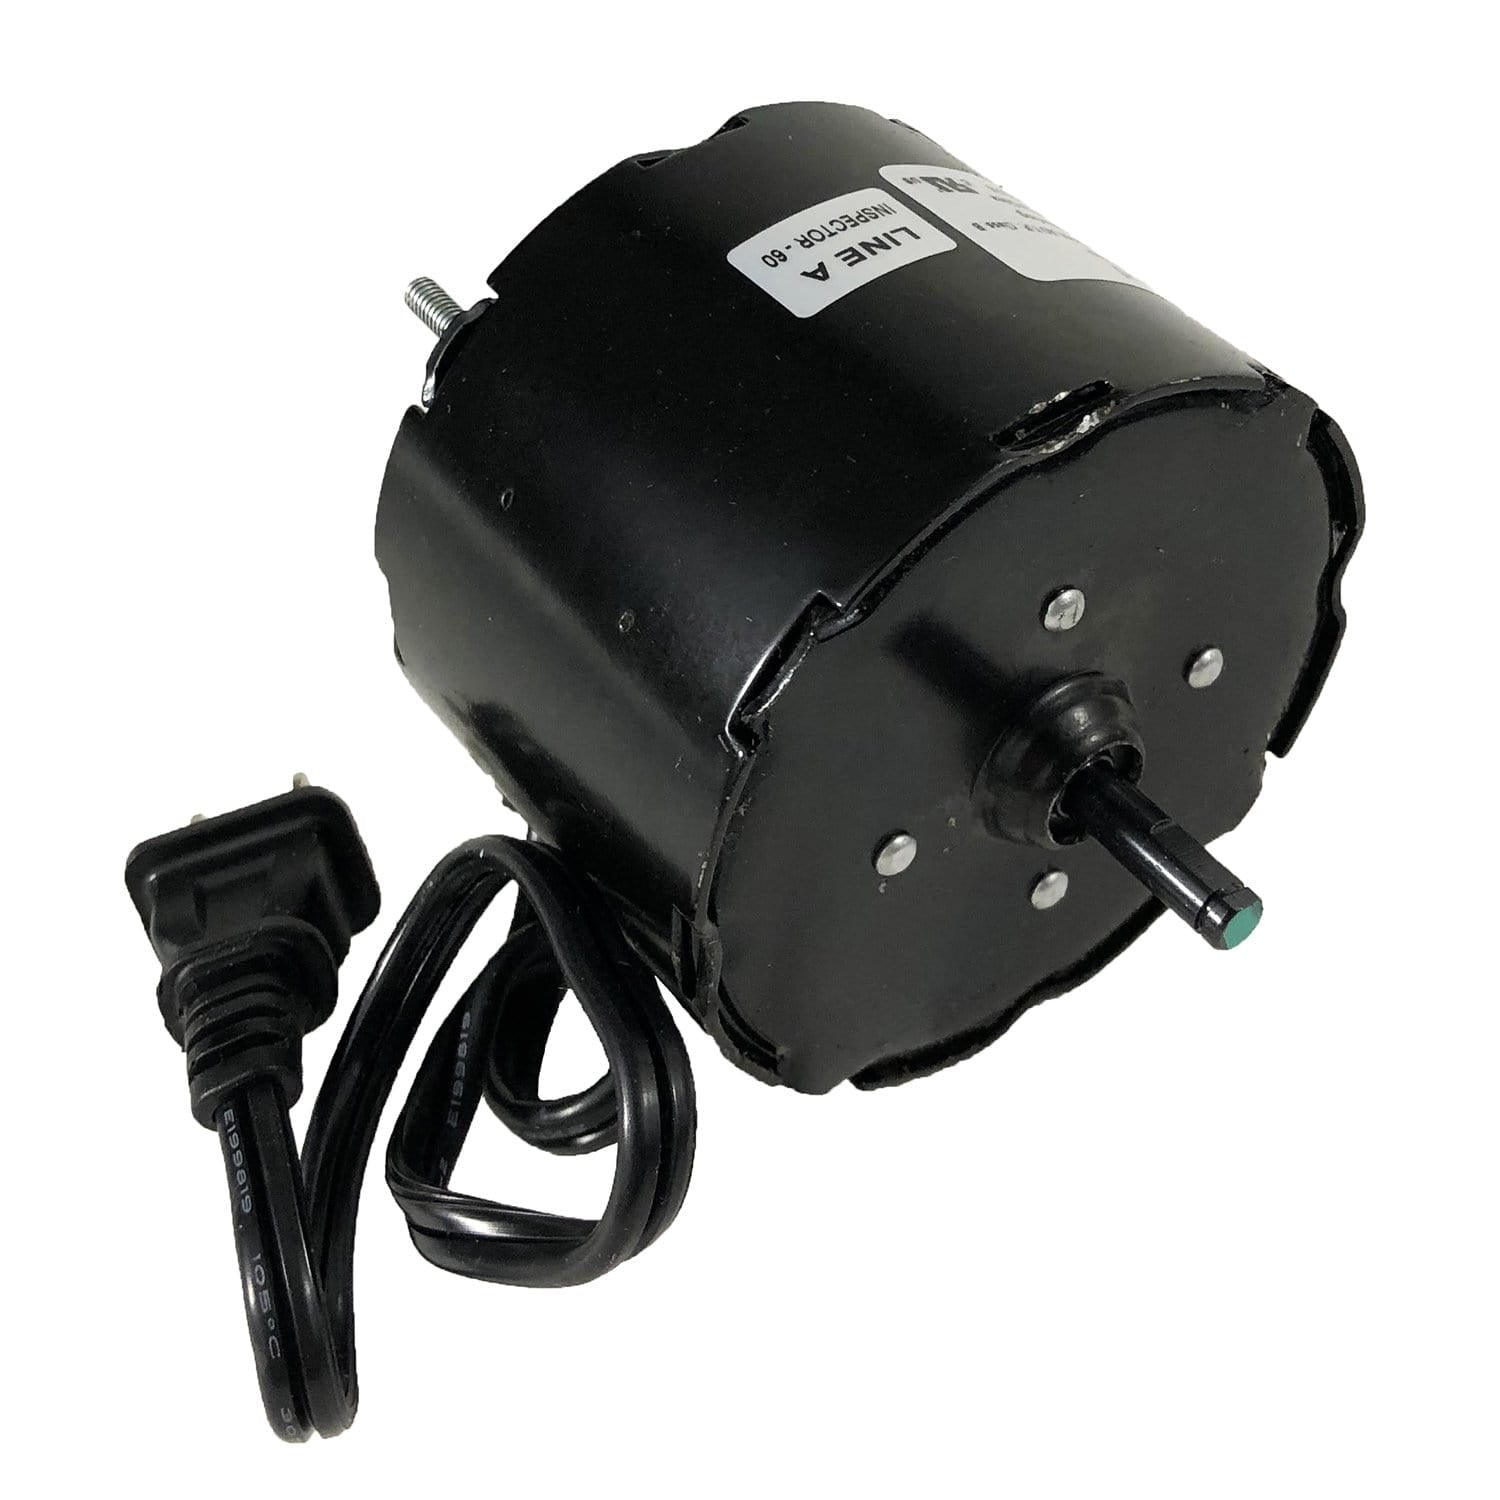 Packard 50500 3000 RPM 115 Volt Shaded Pole Motor